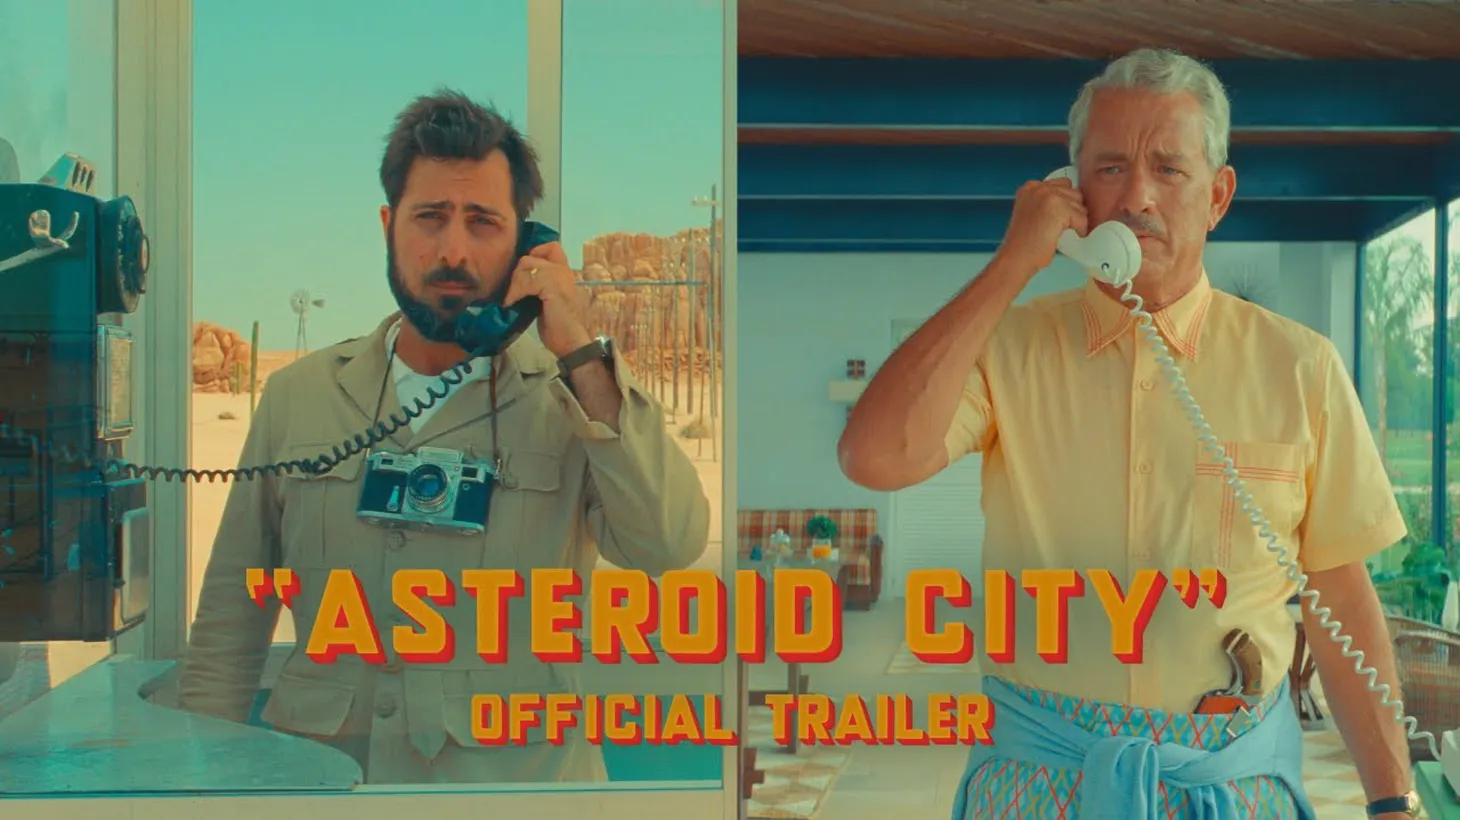 “Asteroid City” is set in a fictional desert town during the 1950s, and stars Jason Schwartzman, Edward Norton, Scarlet Johannson, and Tom Hanks.